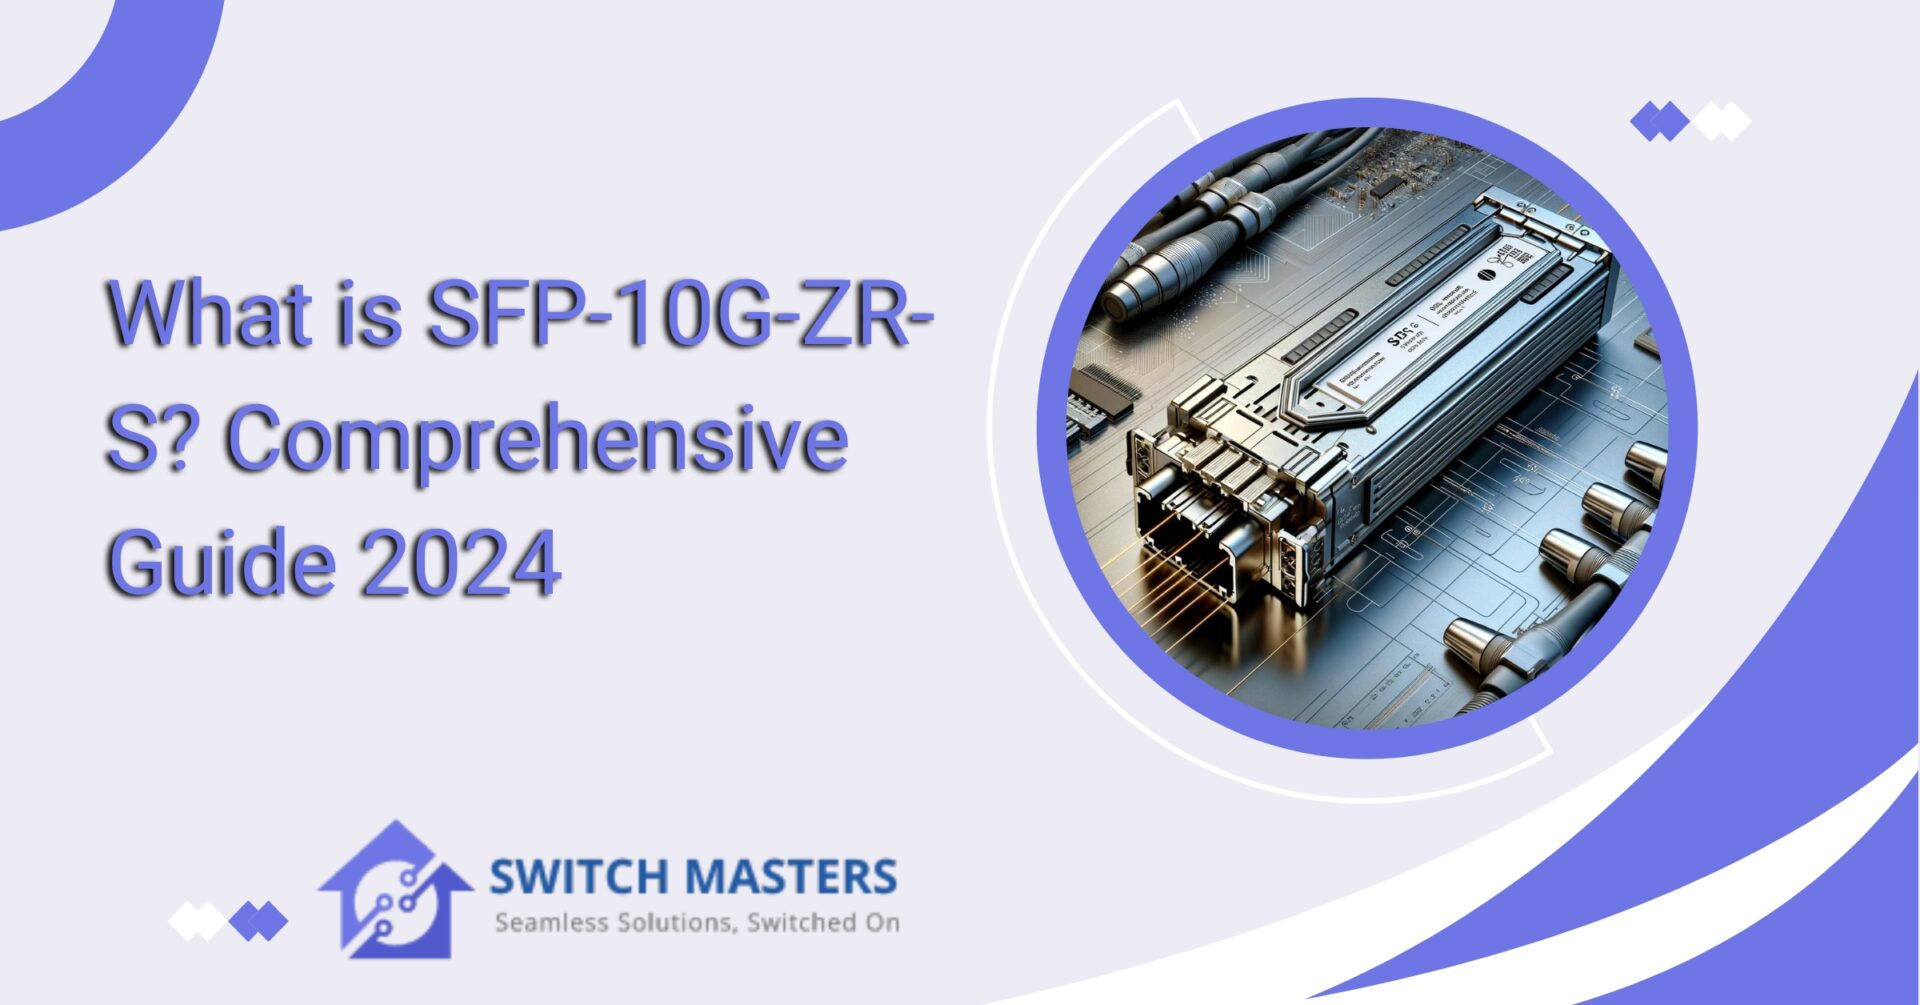 What is SFP-10G-ZR-S